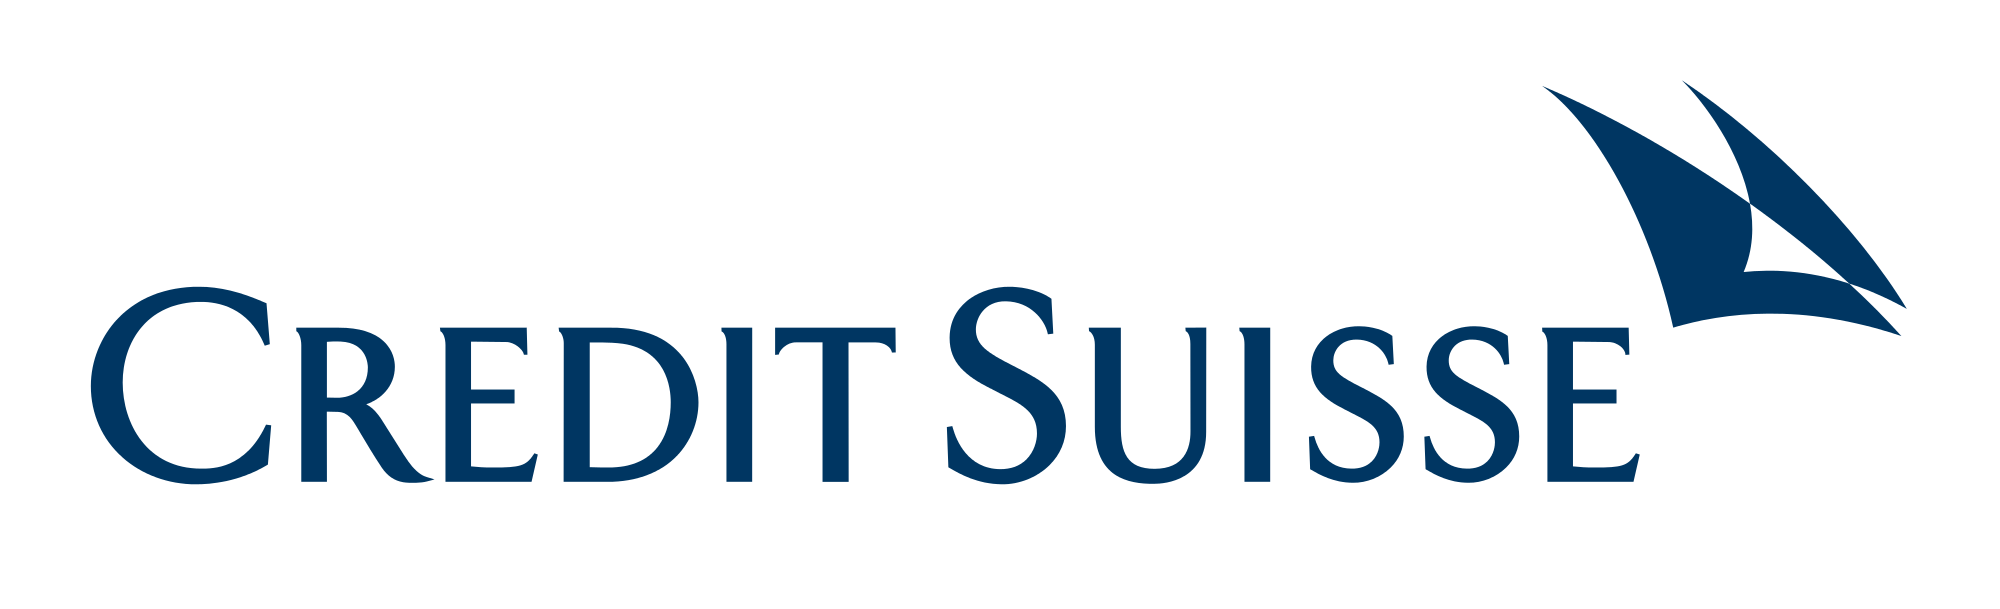 credit-suisse-logo.html in zy